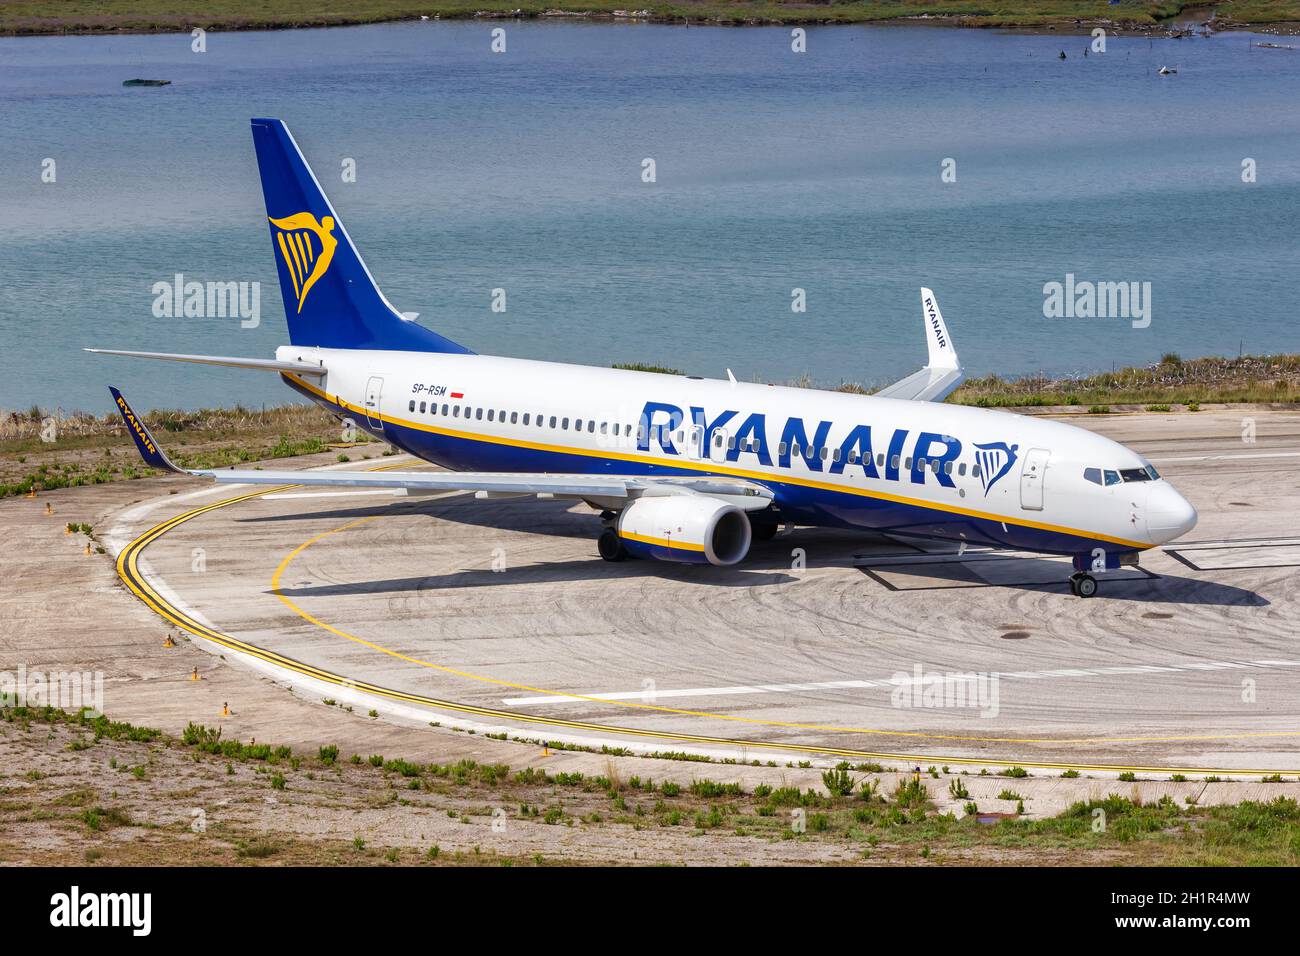 Corfu, Greece - September 19, 2020: Ryanair Boeing 737-800 airplane at Corfu Airport in Greece. Boeing is an American aircraft manufacturer headquarte Stock Photo